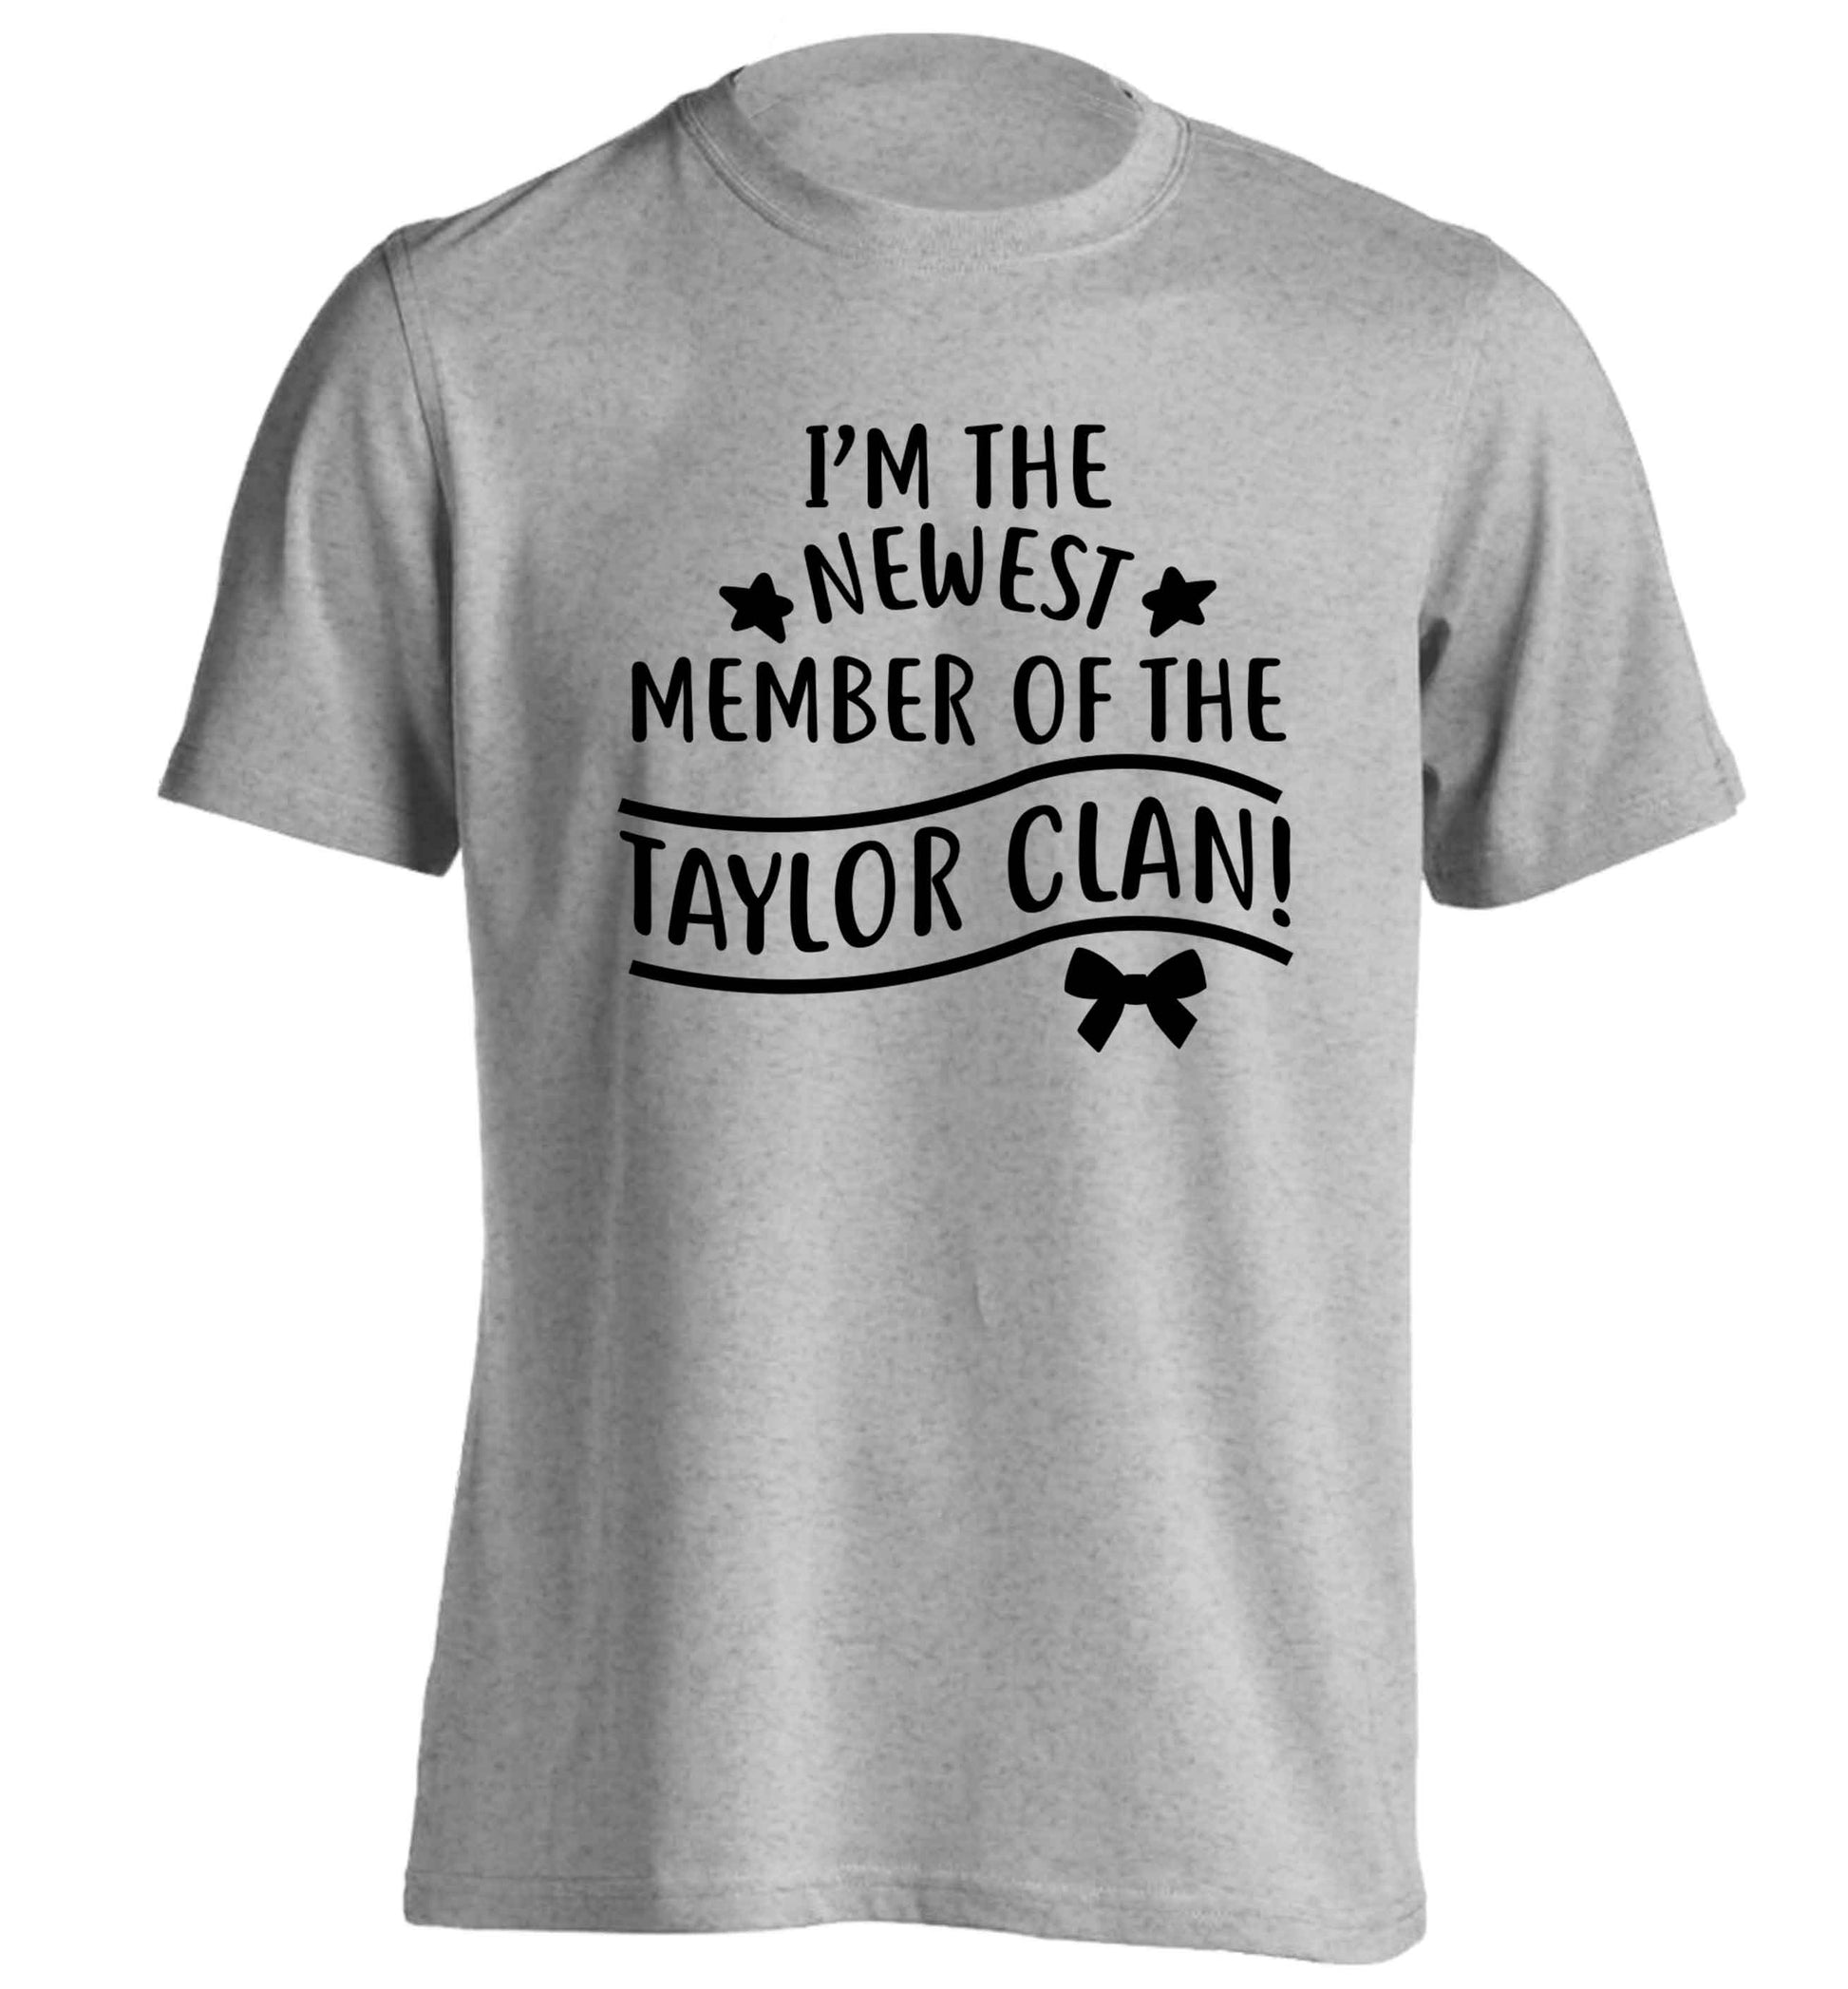 Personalised, newest member of the Taylor clan adults unisex grey Tshirt 2XL